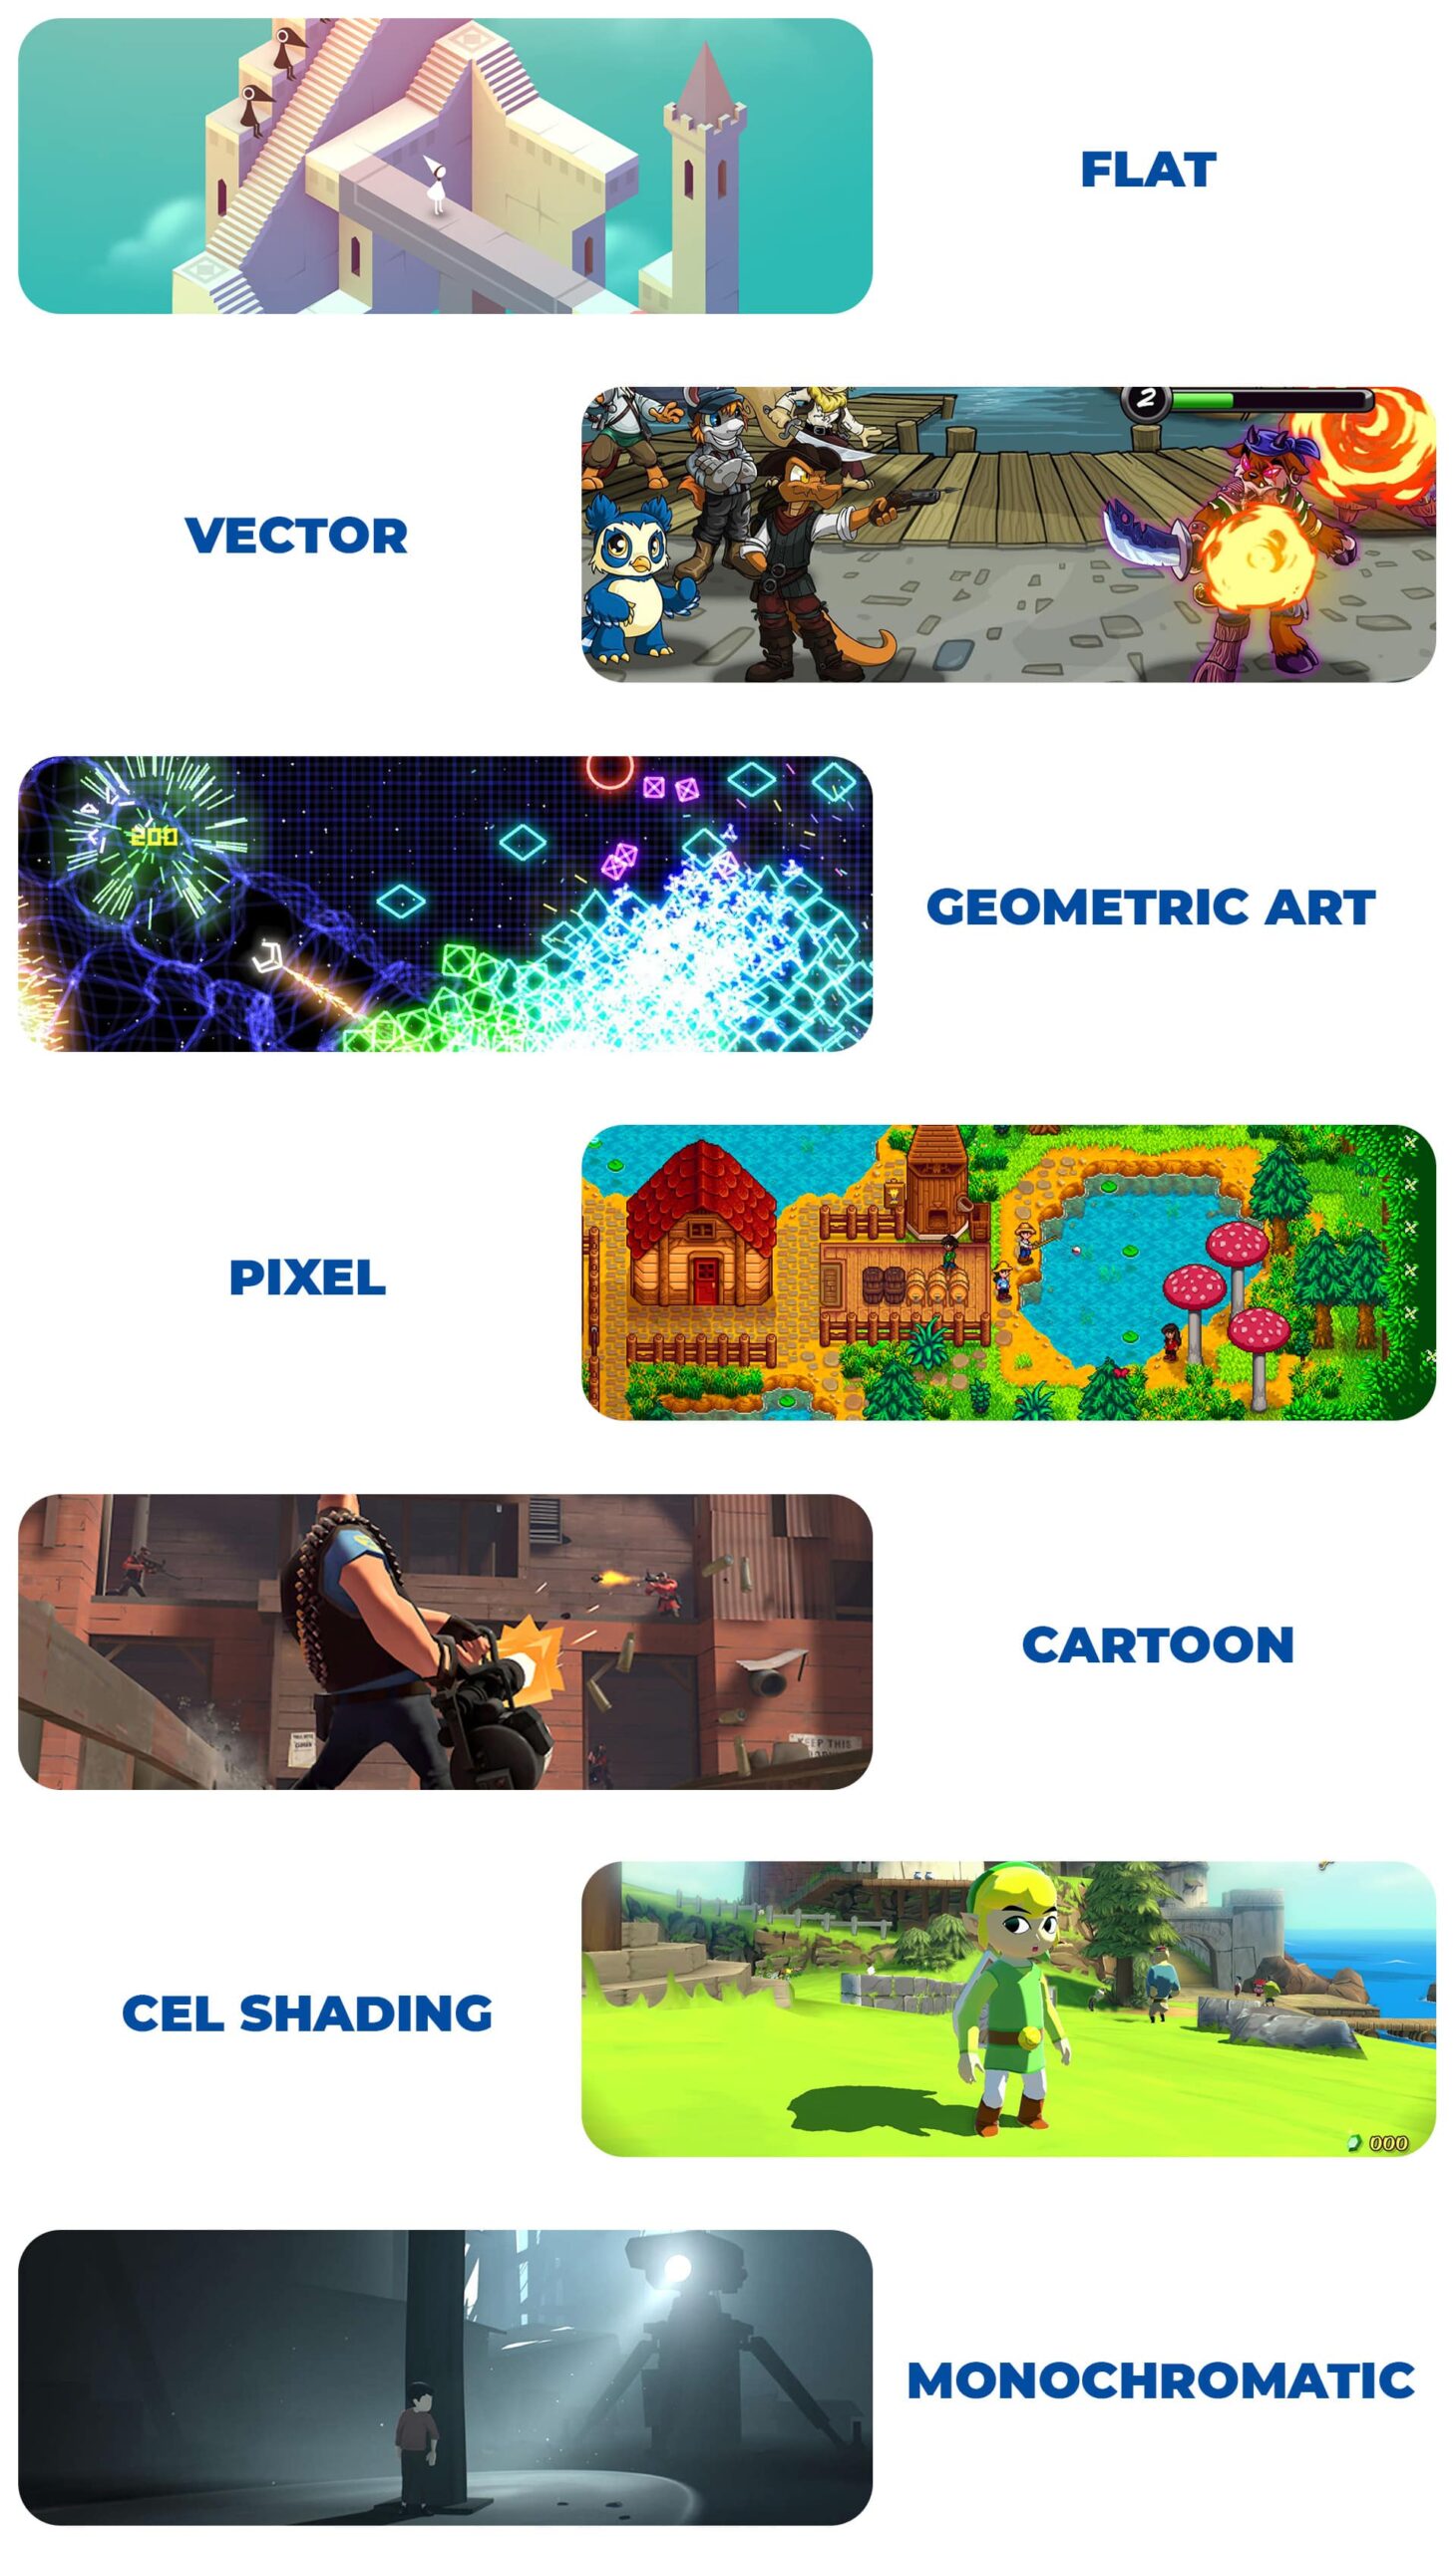 The Ultimate Guide to Game Art Portfolios